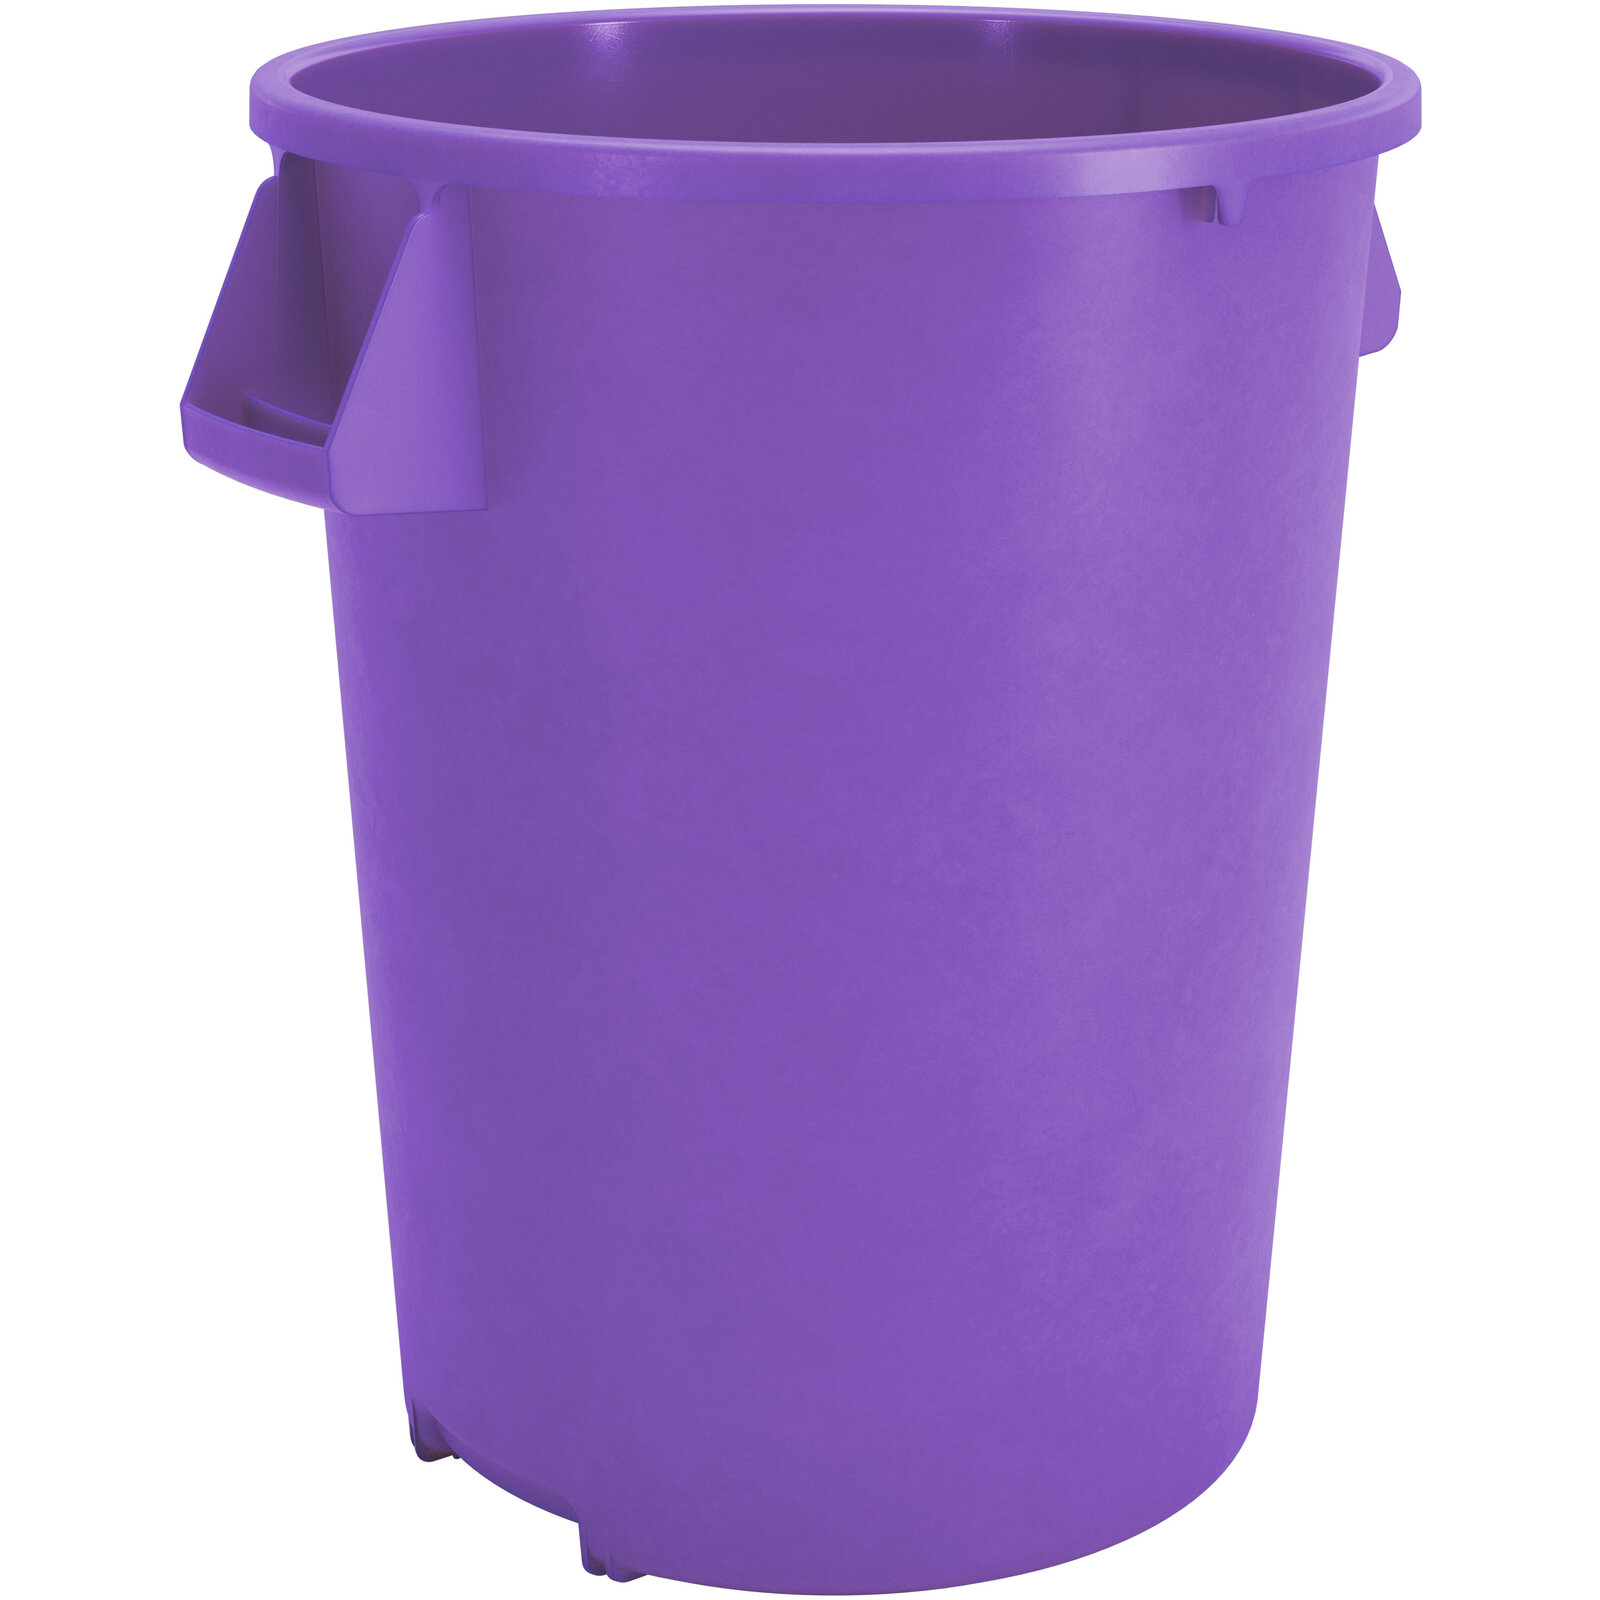 20 Counts / Roll 2-4 Gallon Small Trash Bags Waste Basket Liners Purple